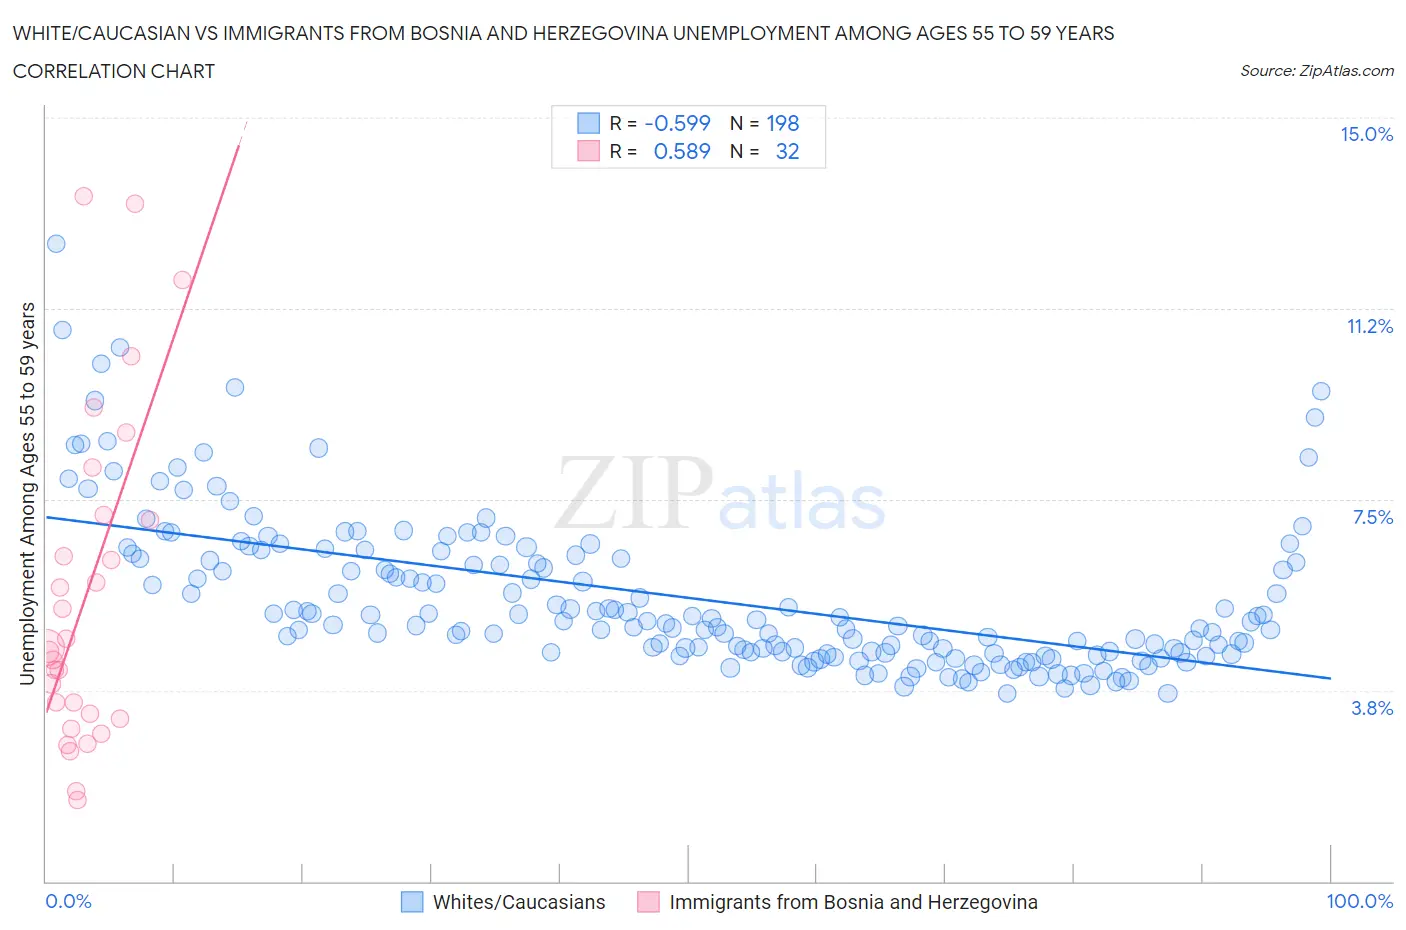 White/Caucasian vs Immigrants from Bosnia and Herzegovina Unemployment Among Ages 55 to 59 years